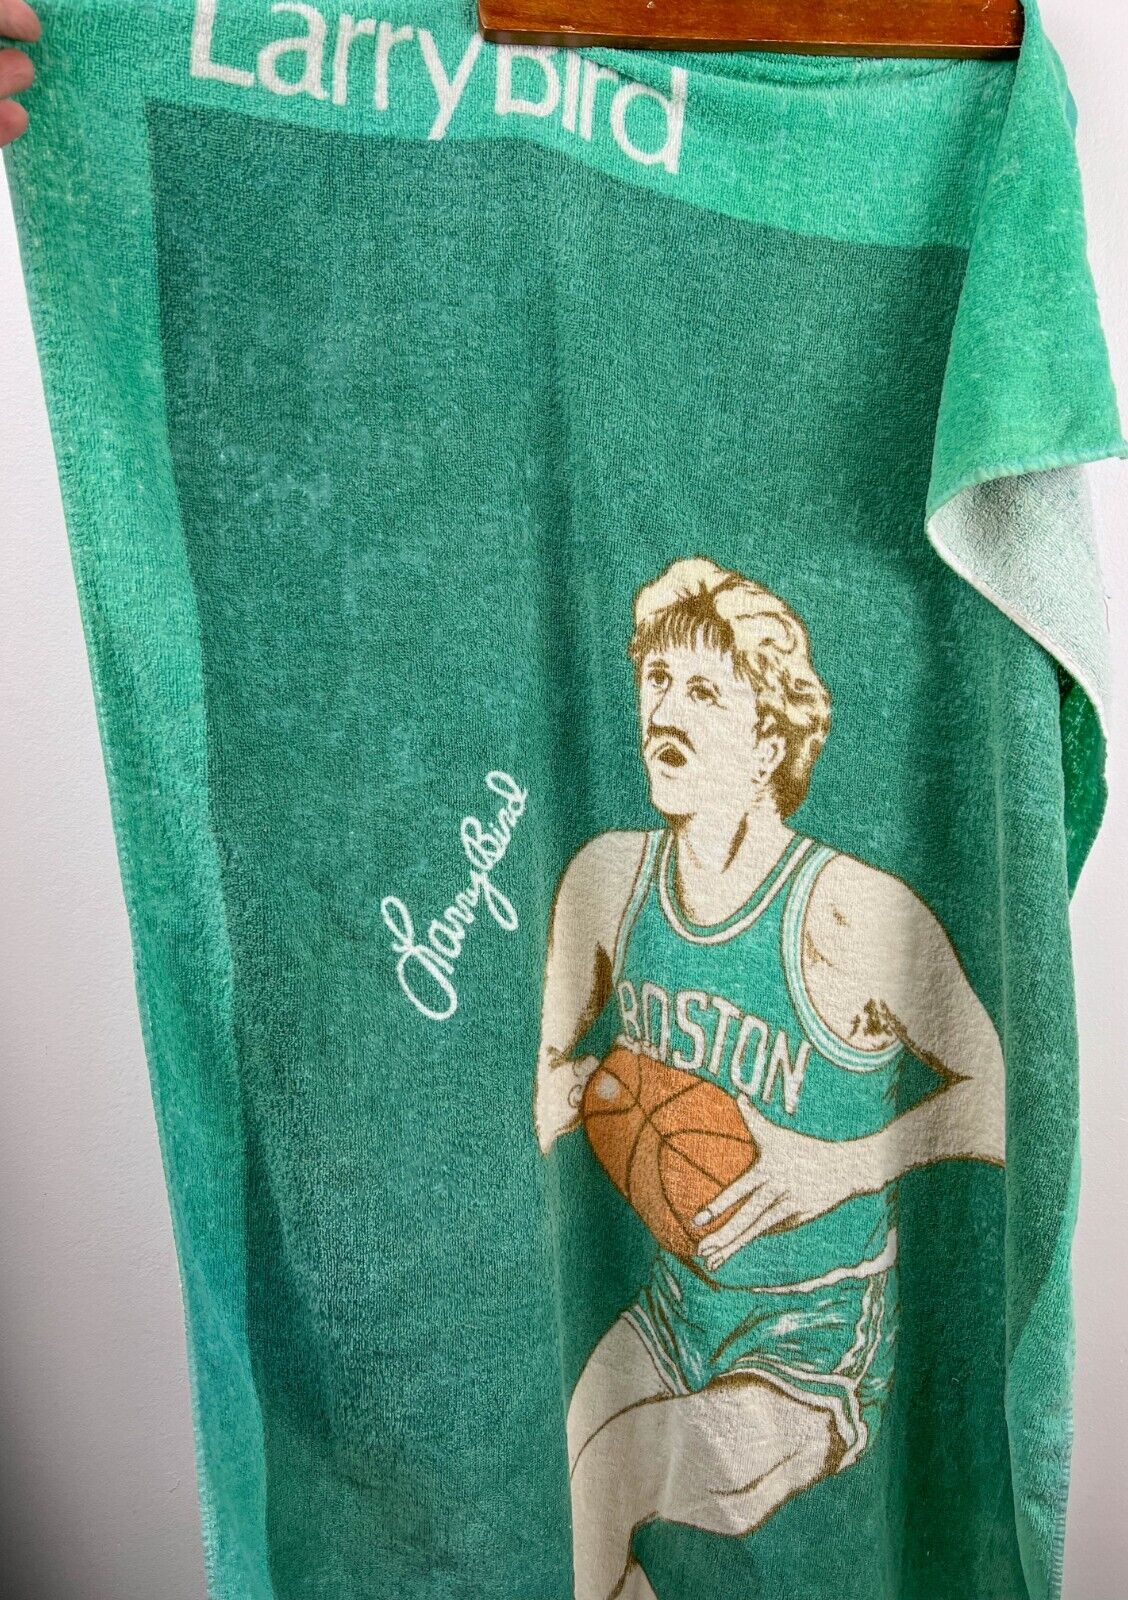 RARE VINTAGE Green Larry Bird Beach Towel From The 1980s